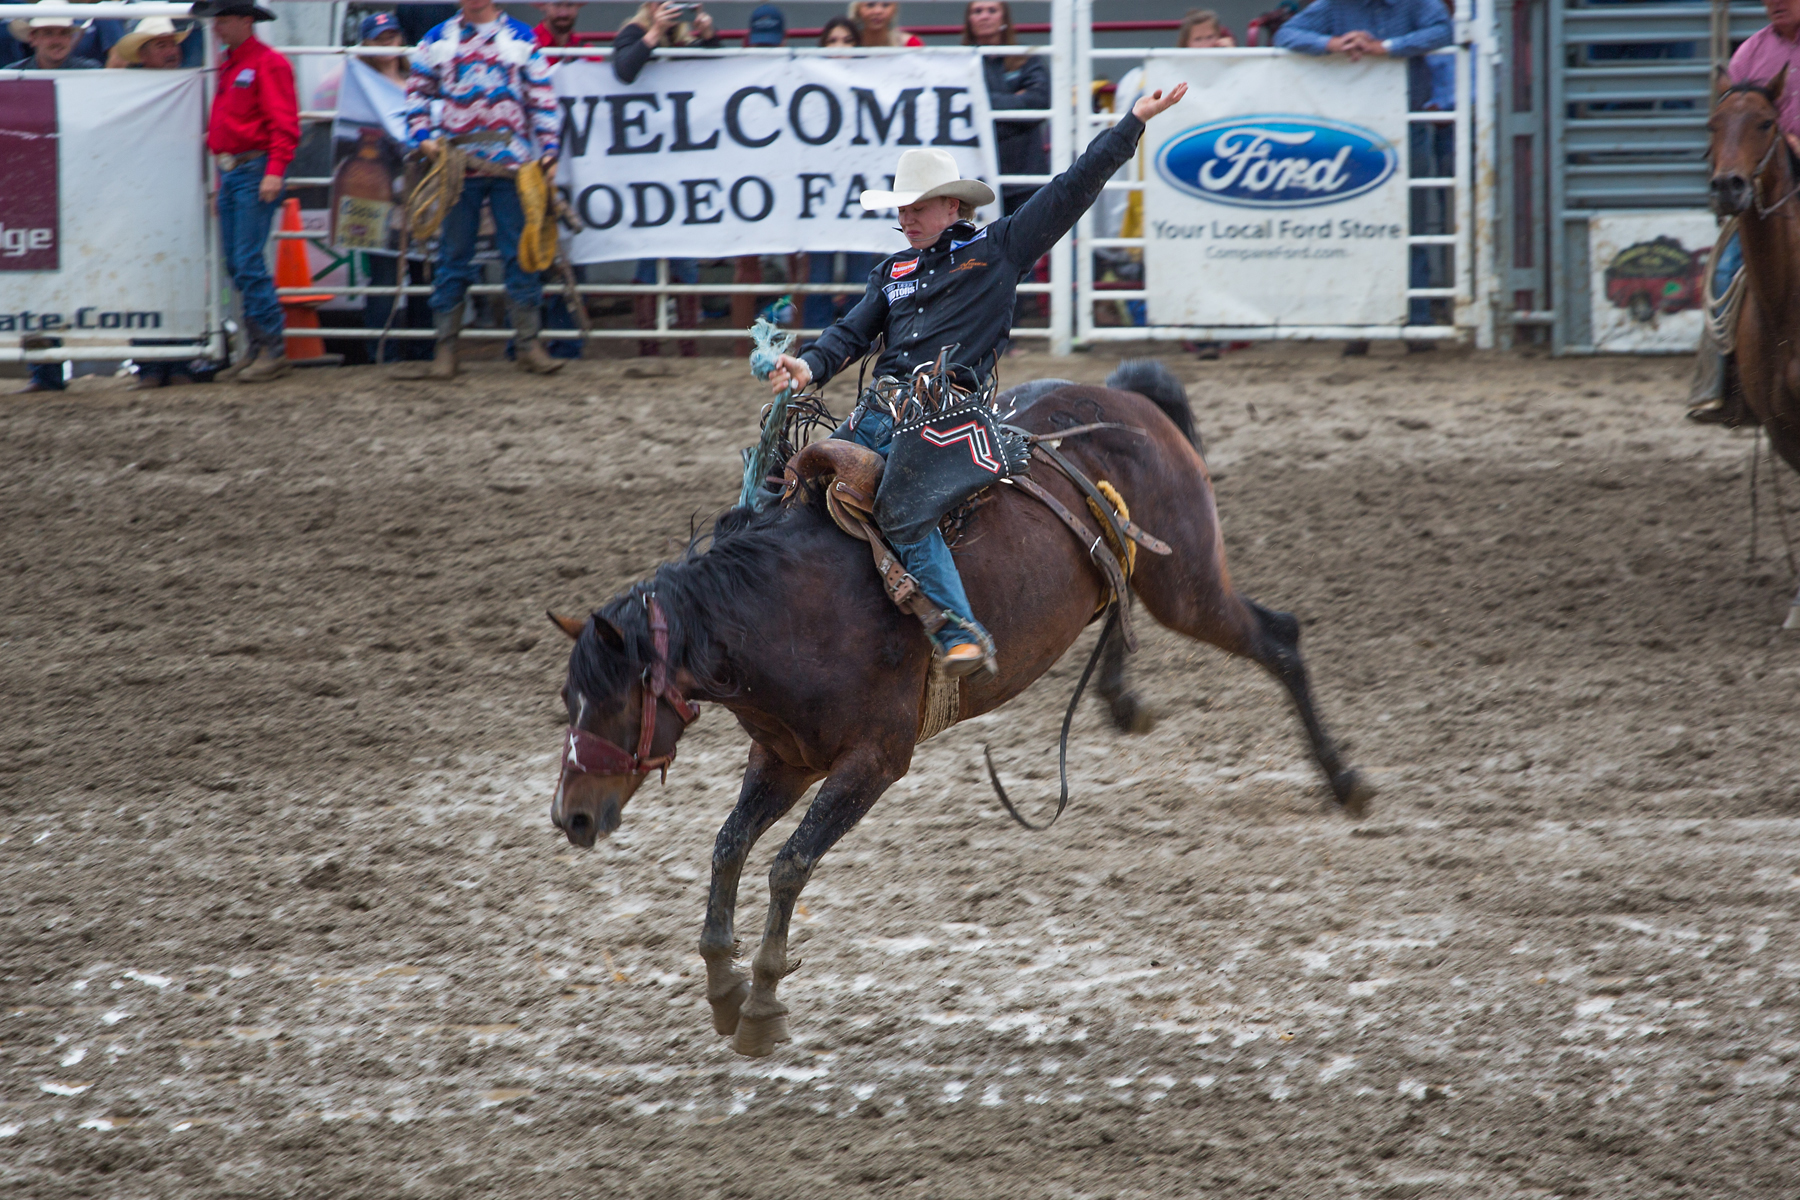 Saddle bronc at Home of Champions Rodeo, Red Lodge, MT, July 4, 2021.  Click for next photo.